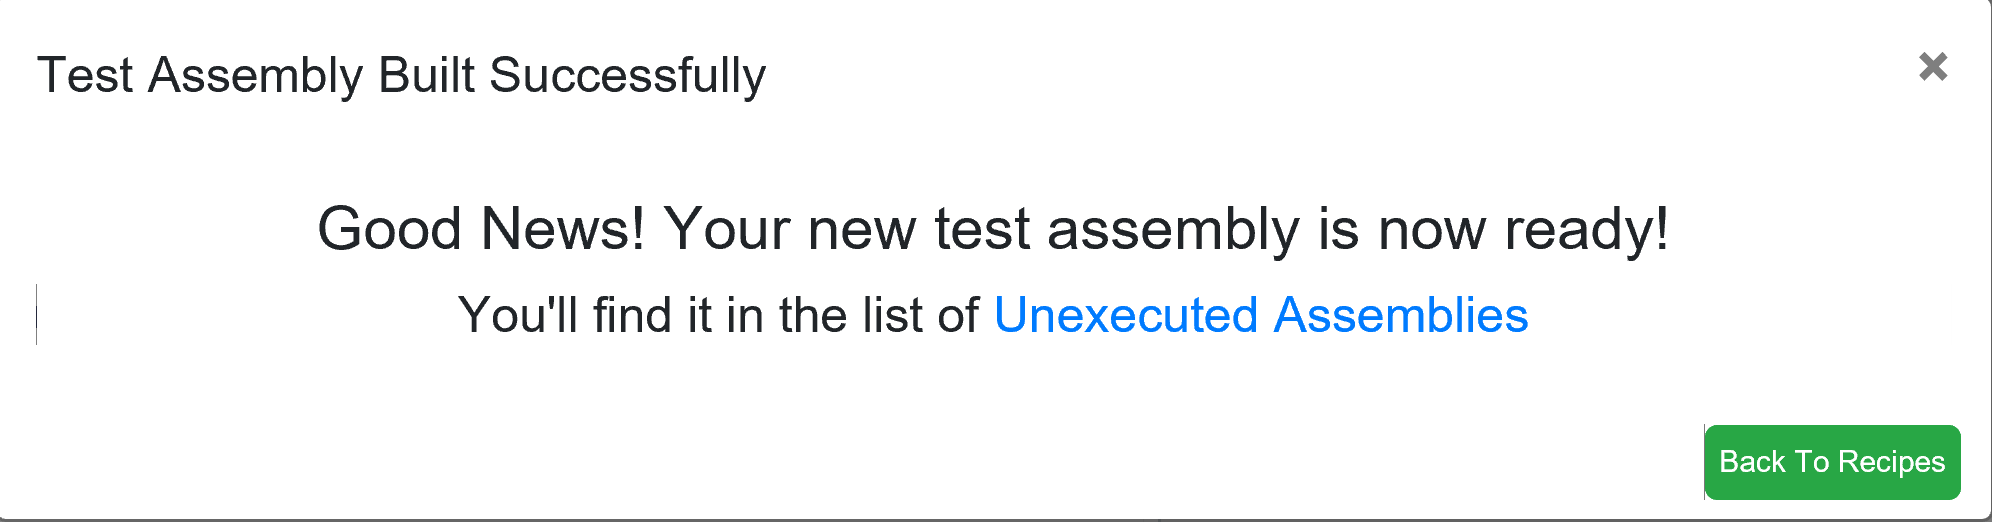 SentryOne Test Database column range check Test Assembly Built Successfully